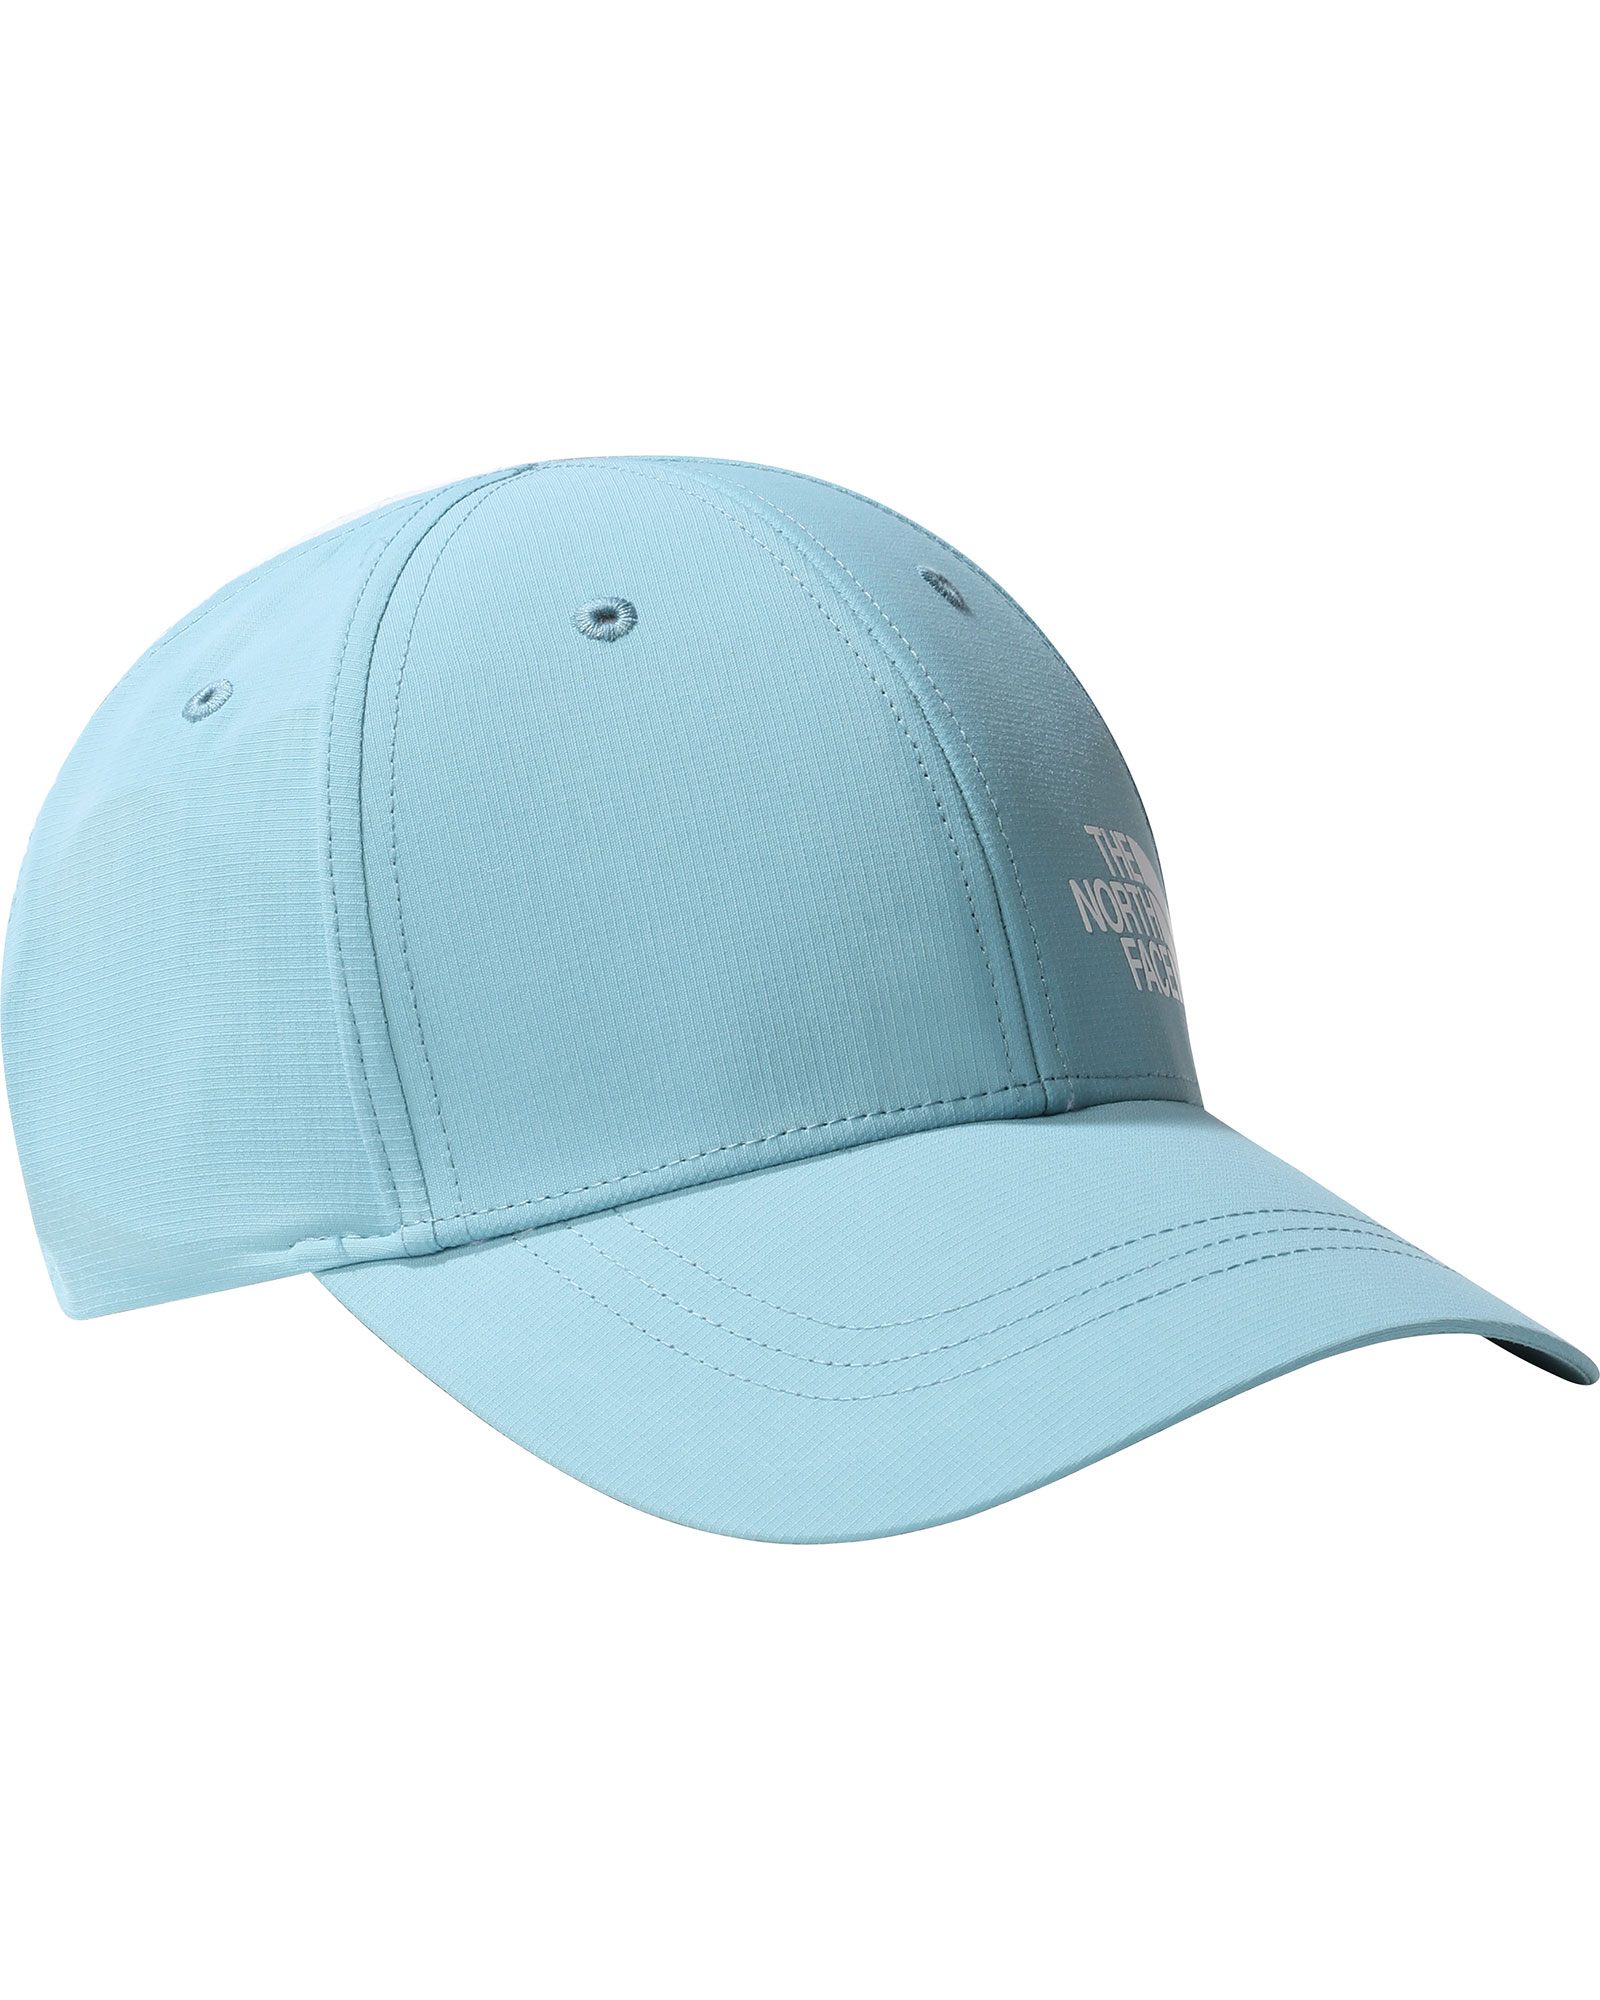 The North Face Women’s Horizon Hat - Reef Waters S/M